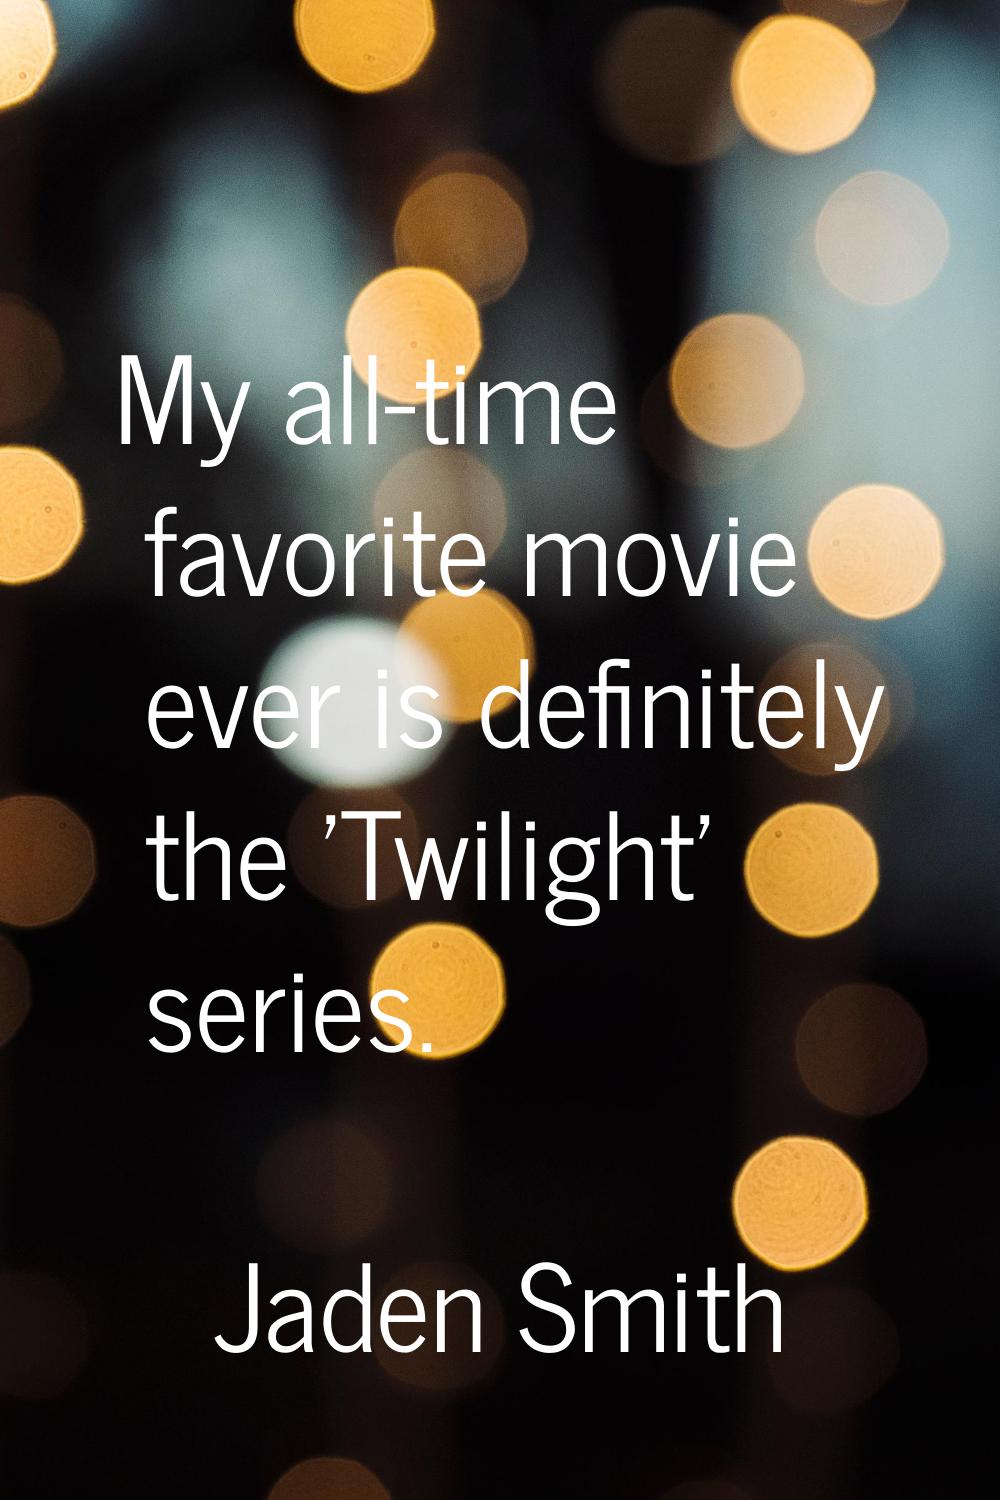 My all-time favorite movie ever is definitely the 'Twilight' series.